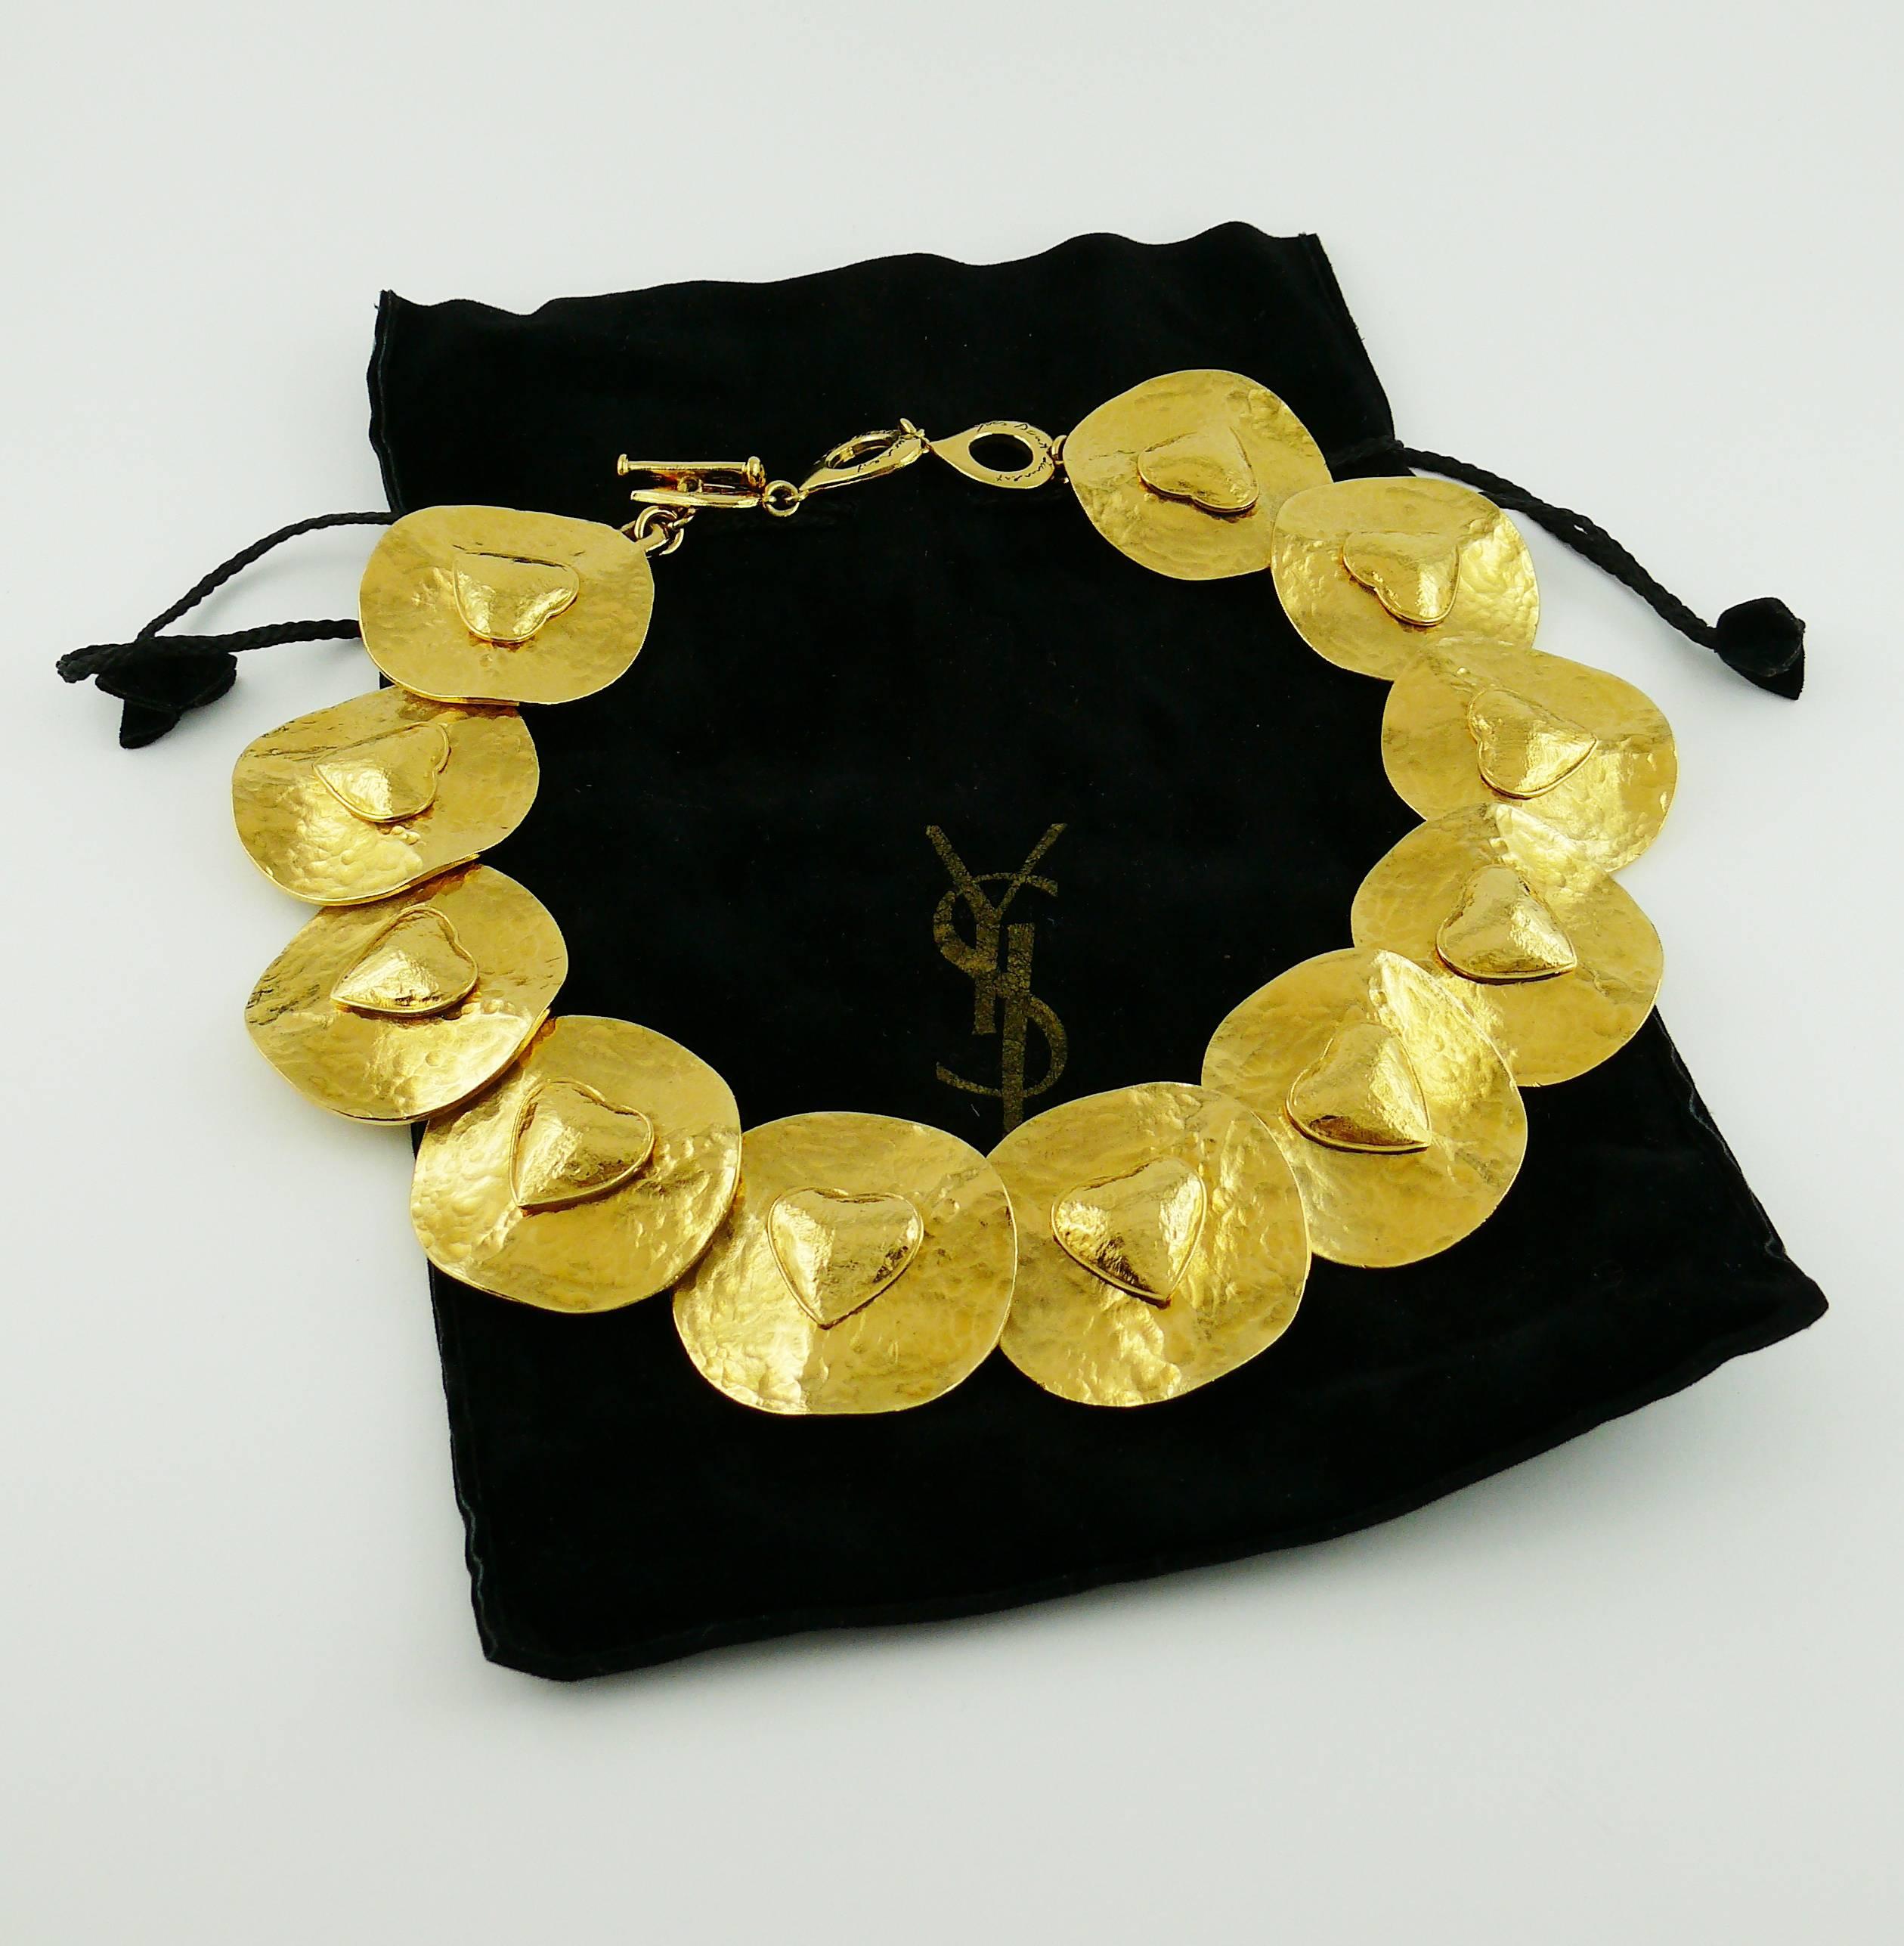 YVES SAINT LAURENT vintage rare gold toned choker necklace featuring textured creased discs with heart appliqués.

Signed YVES SAINT LAURENT Made in France on the iconic 